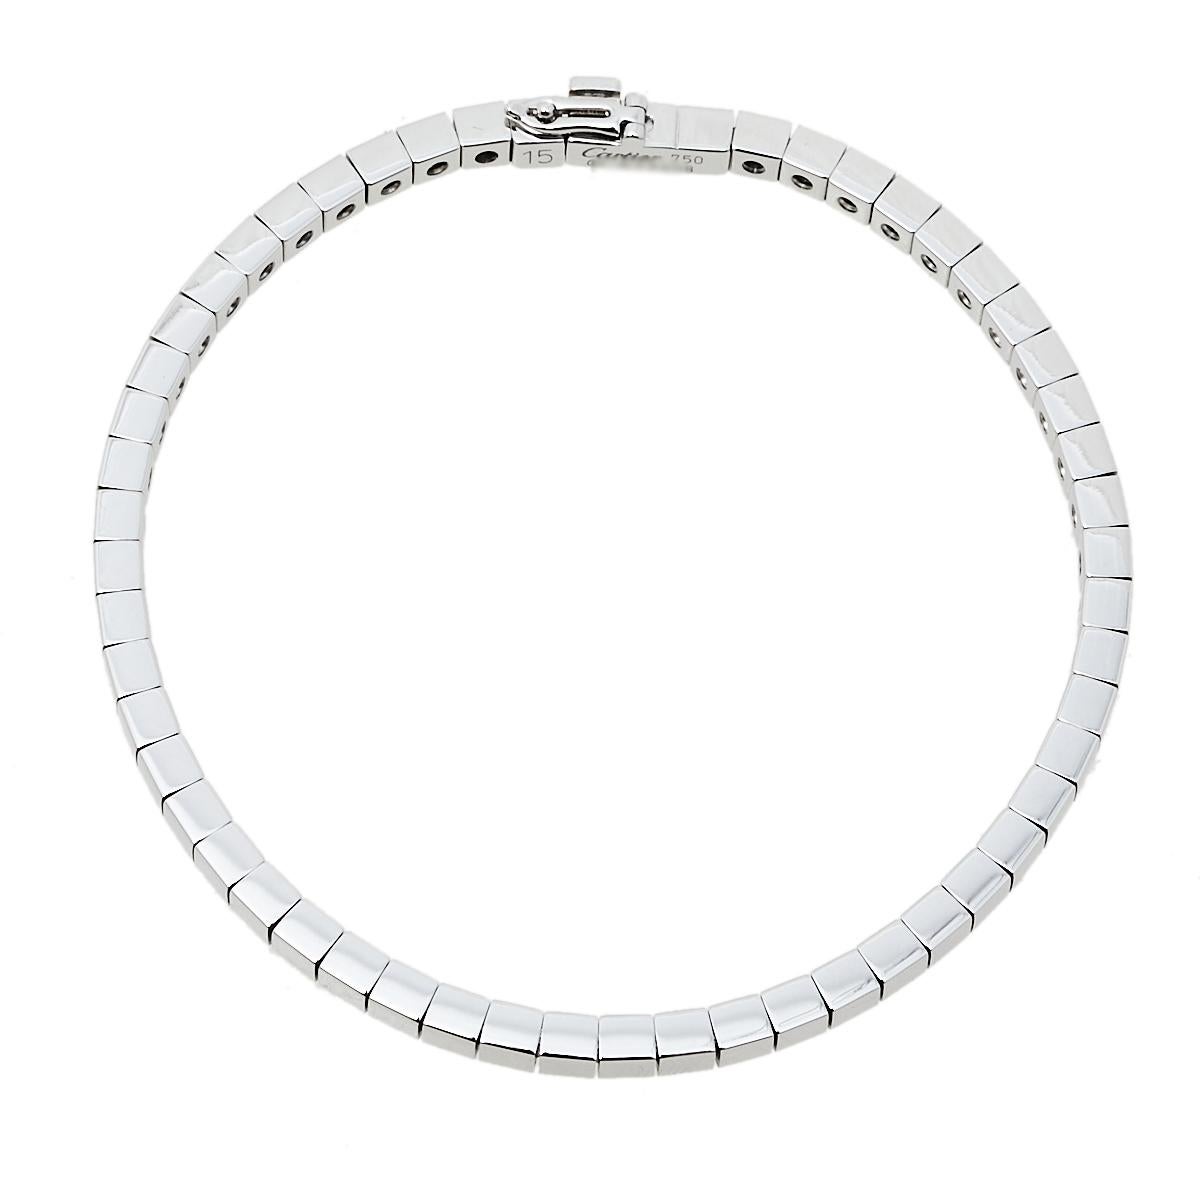 This meticulously crafted bracelet is from the Cartier Lanières collection. Made from 18k white gold, the precious creation features the brand's signature square-cut design and a simple lock. It is bound to offer a comfortable fit and a luxurious